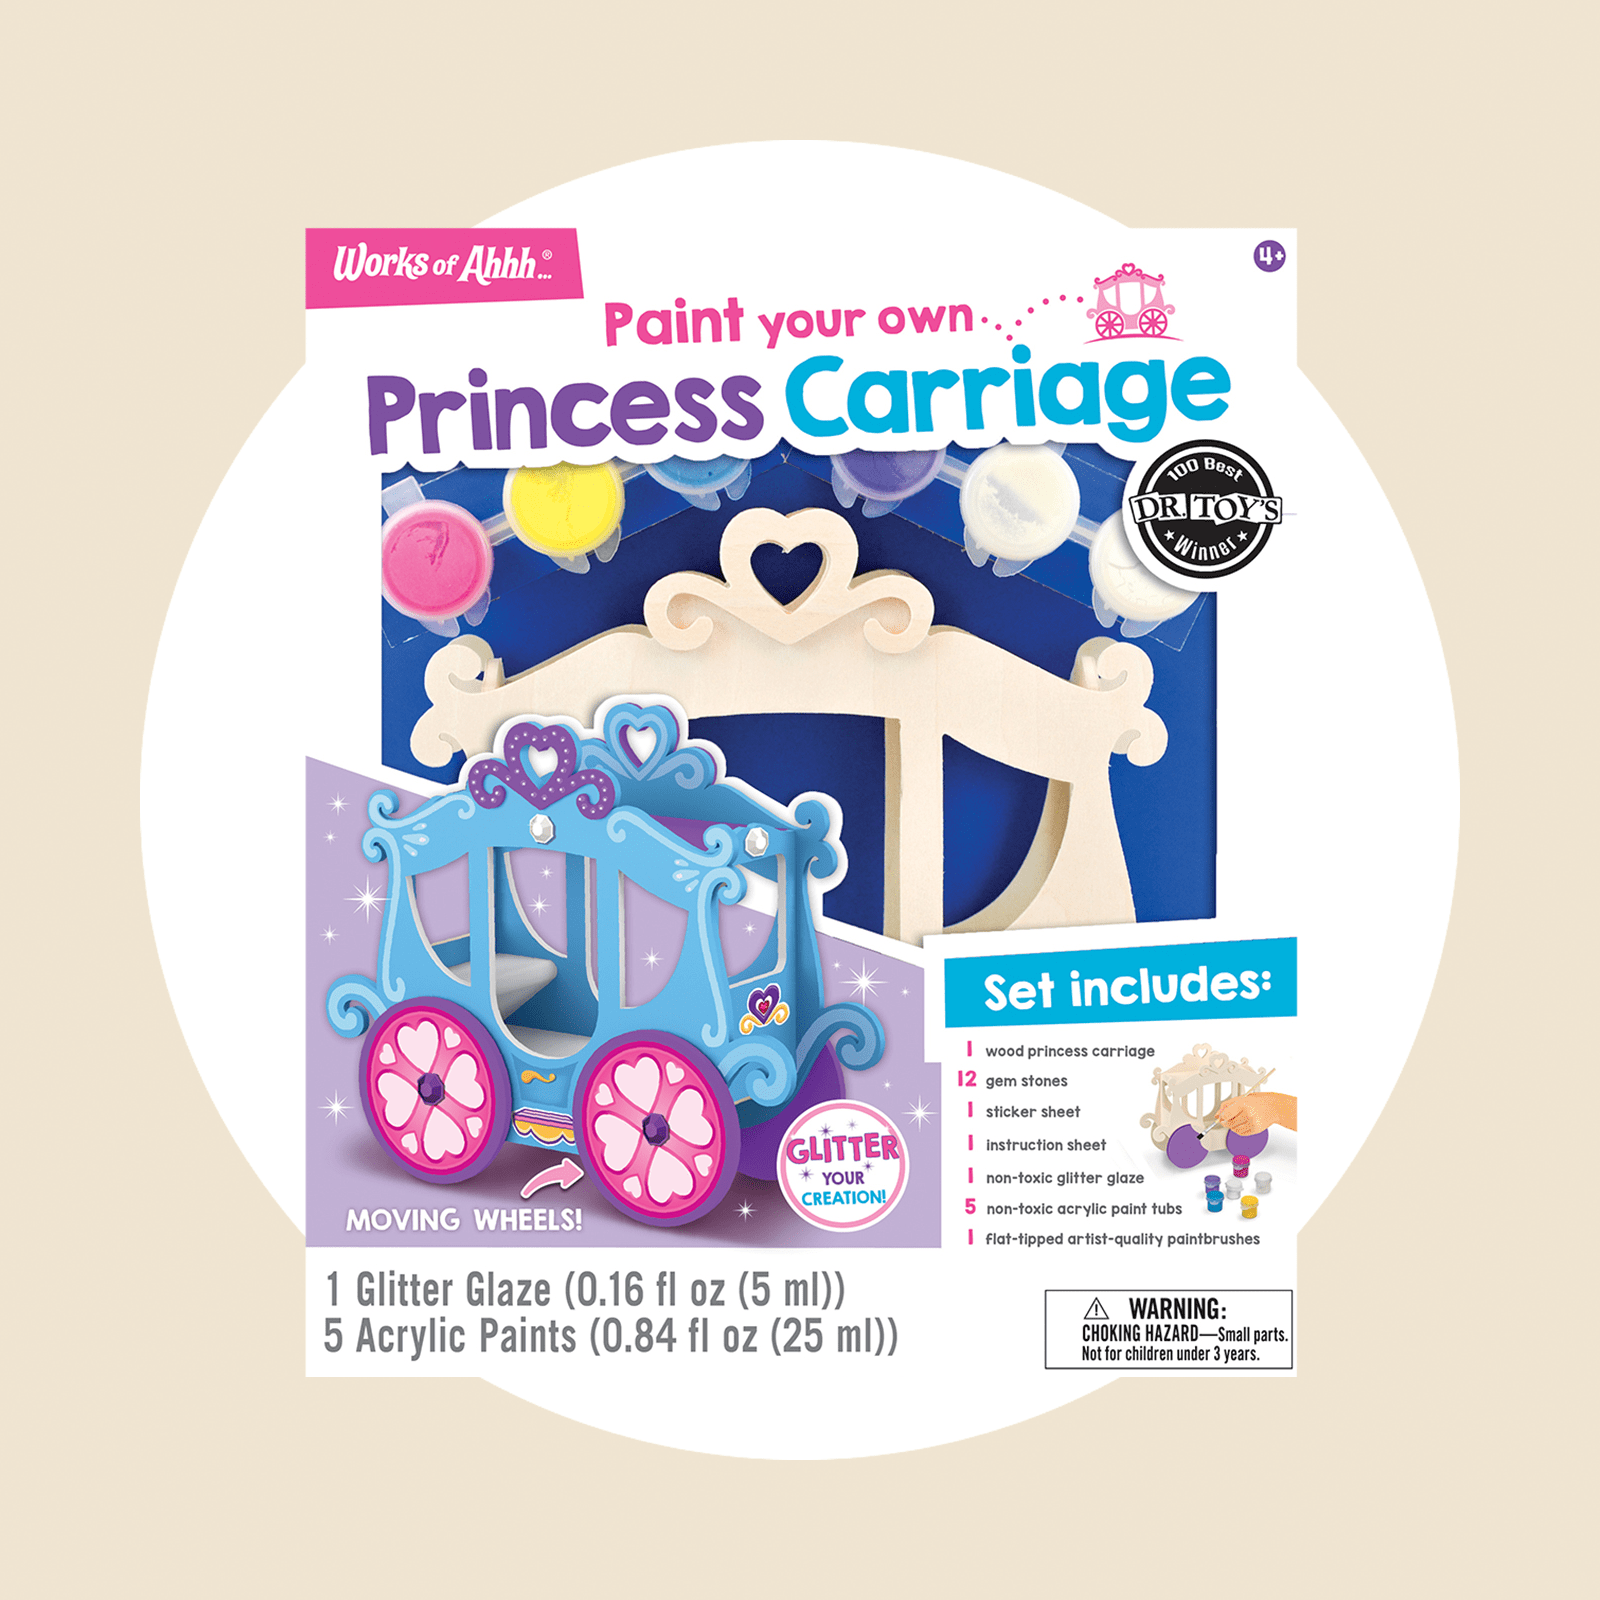 https://www.tasteofhome.com/wp-content/uploads/2022/04/works-of-ahh-paint-your-own-princess-carriage-ecomm-via-joanne.png?fit=700%2C700